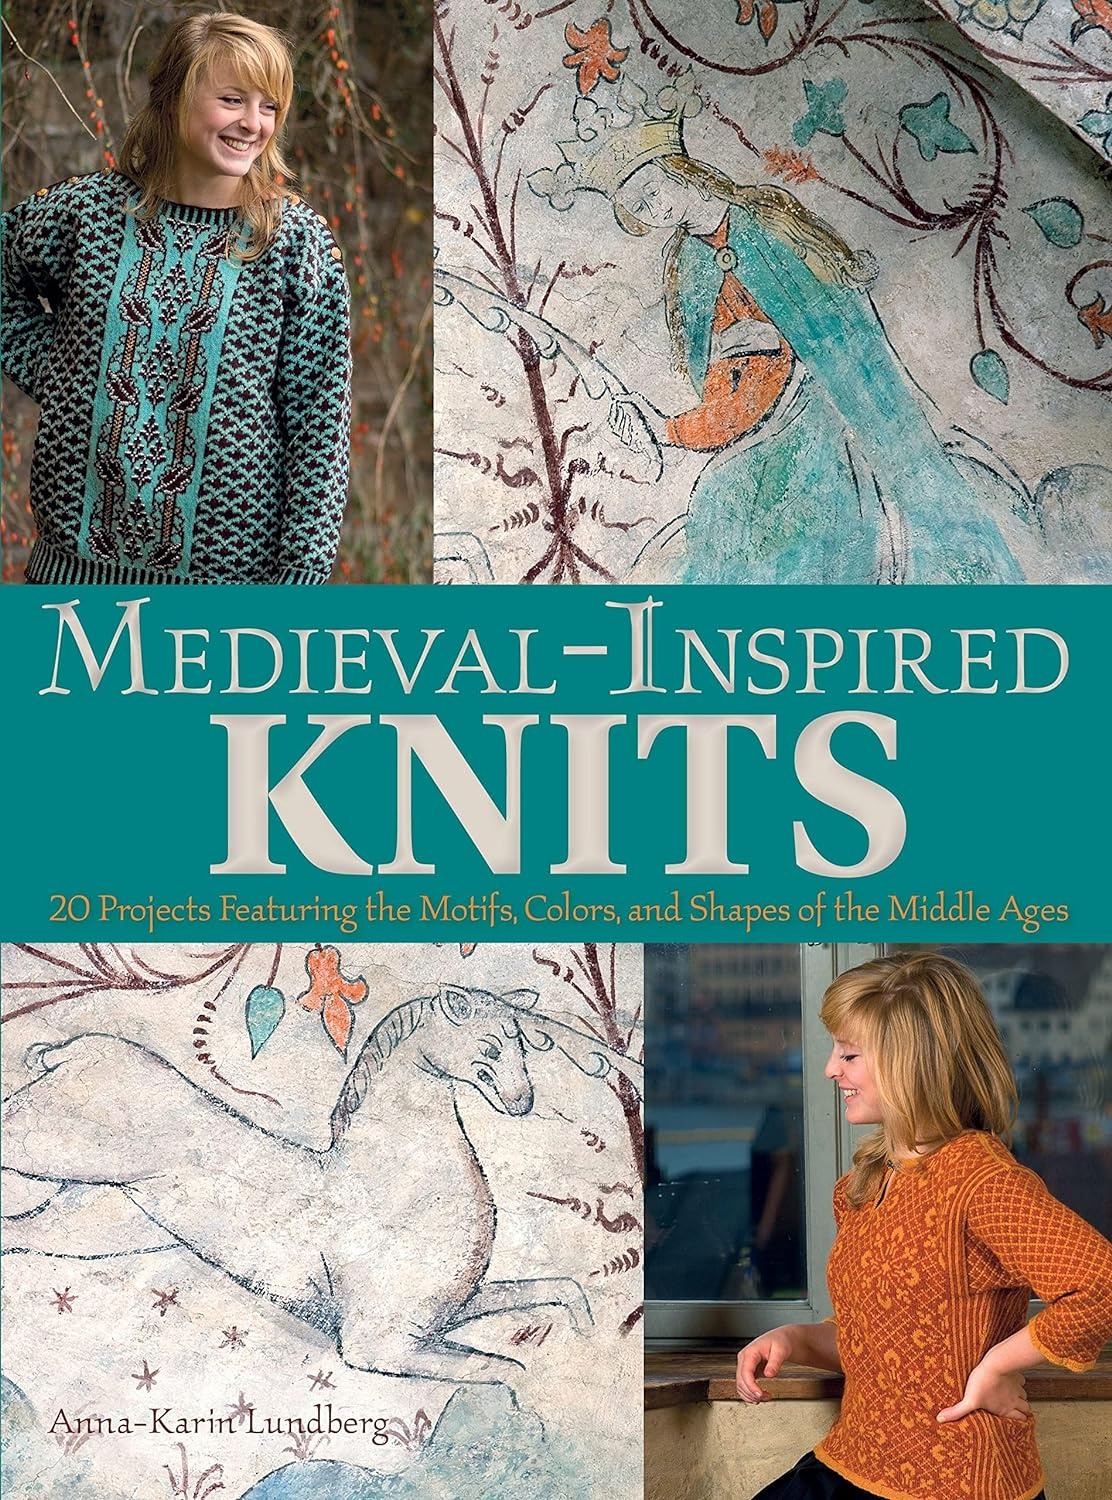 Medieval European Quilting and the Art of Storytelling – Nancy's Notions